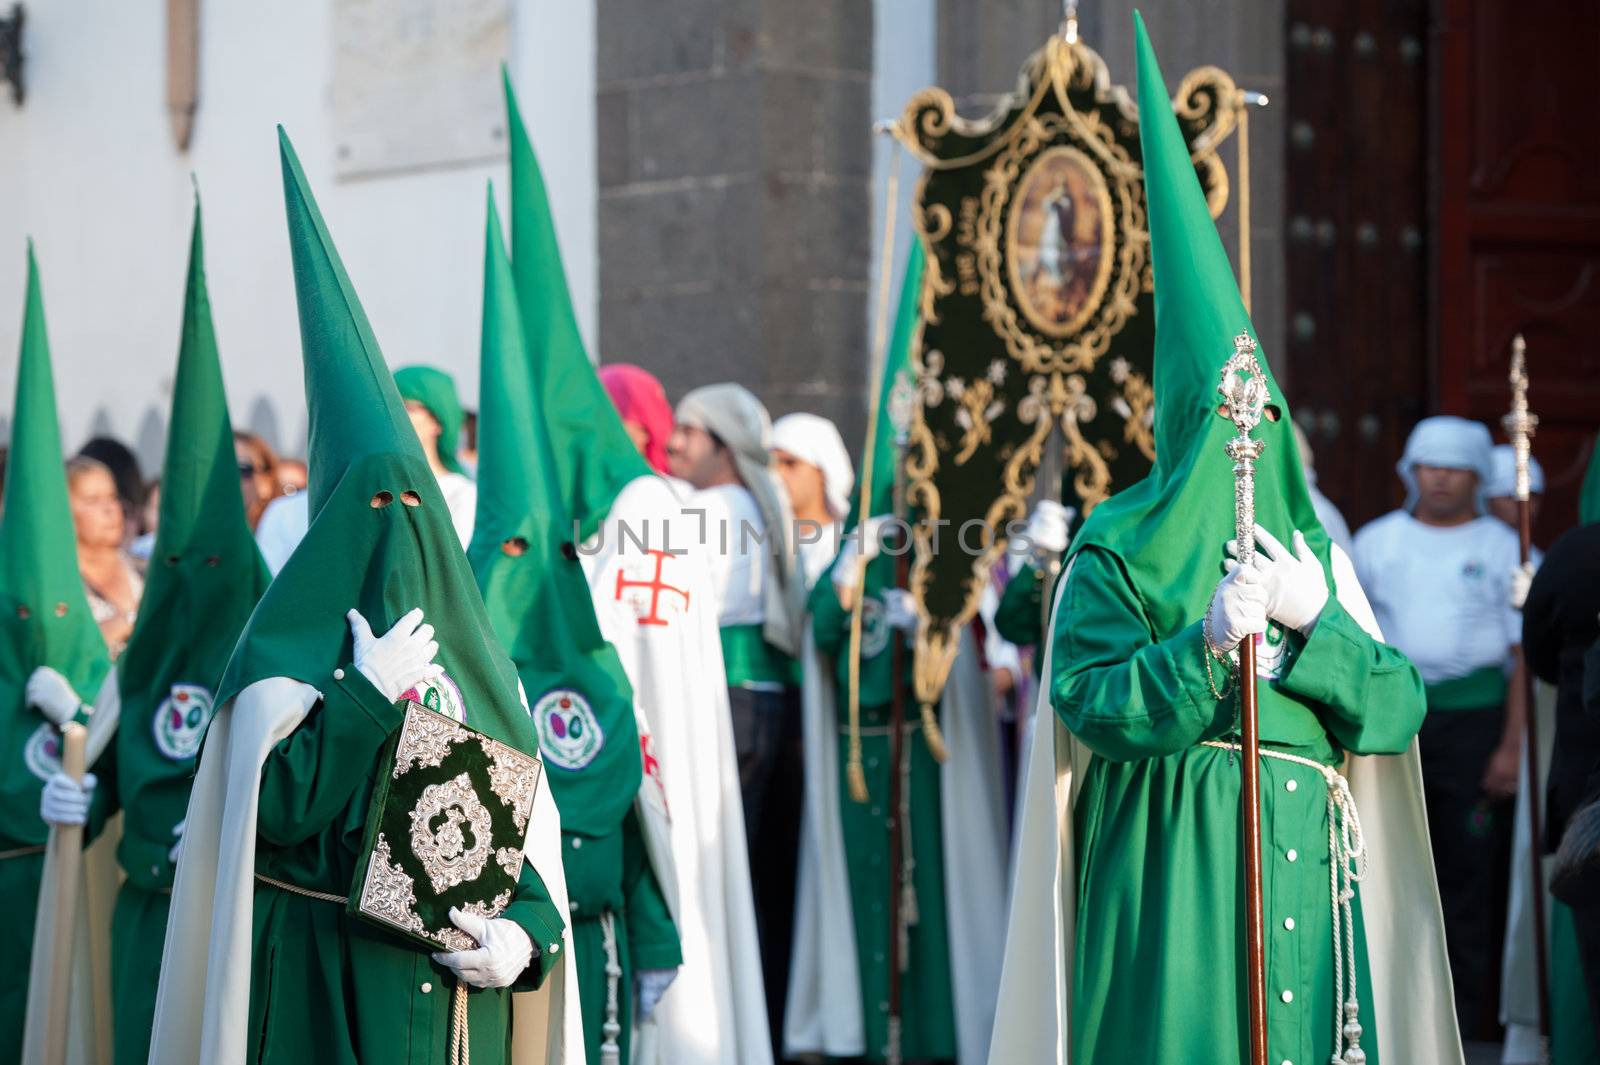 LAS PALMAS, SPAIN–APRIL 2: Unidentified persons, from Canary Islands, wearing hoods (capirotes) and cloaks, during Holy Week marching procession on April 2, 2012 in Las Palmas, Spain
